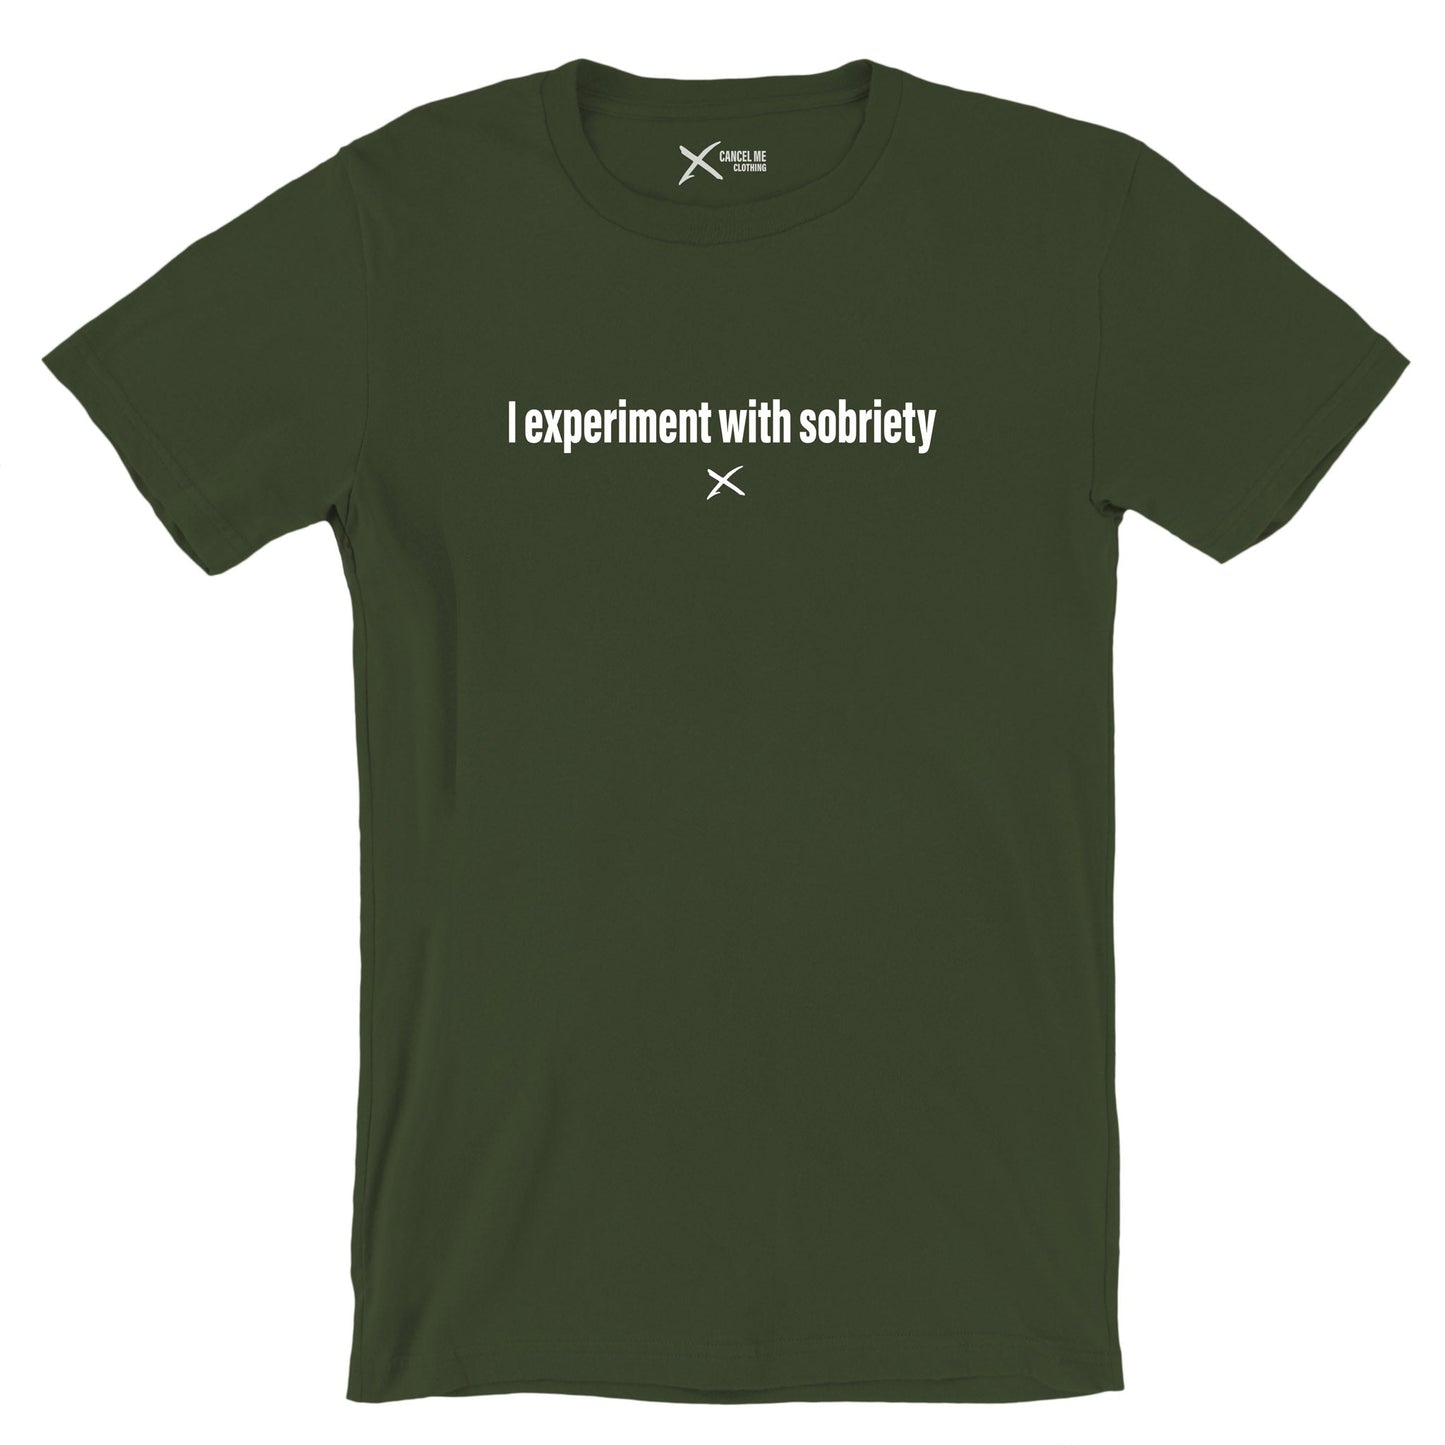 I experiment with sobriety - Shirt